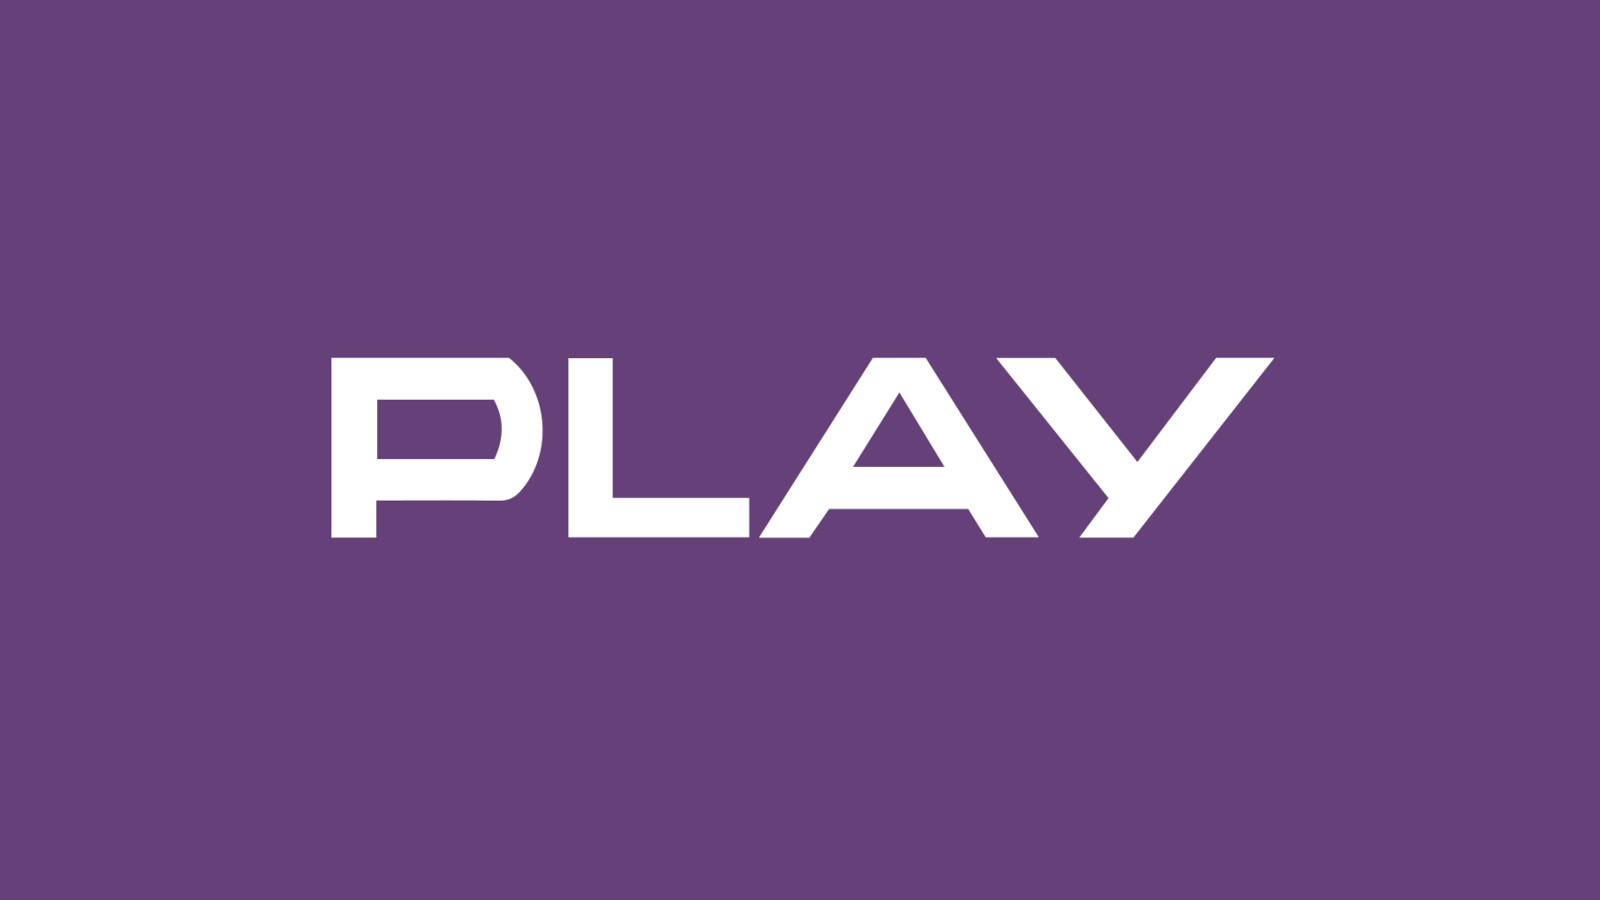 PLAY 30 PLN Mobile Top-up PL, $7.93